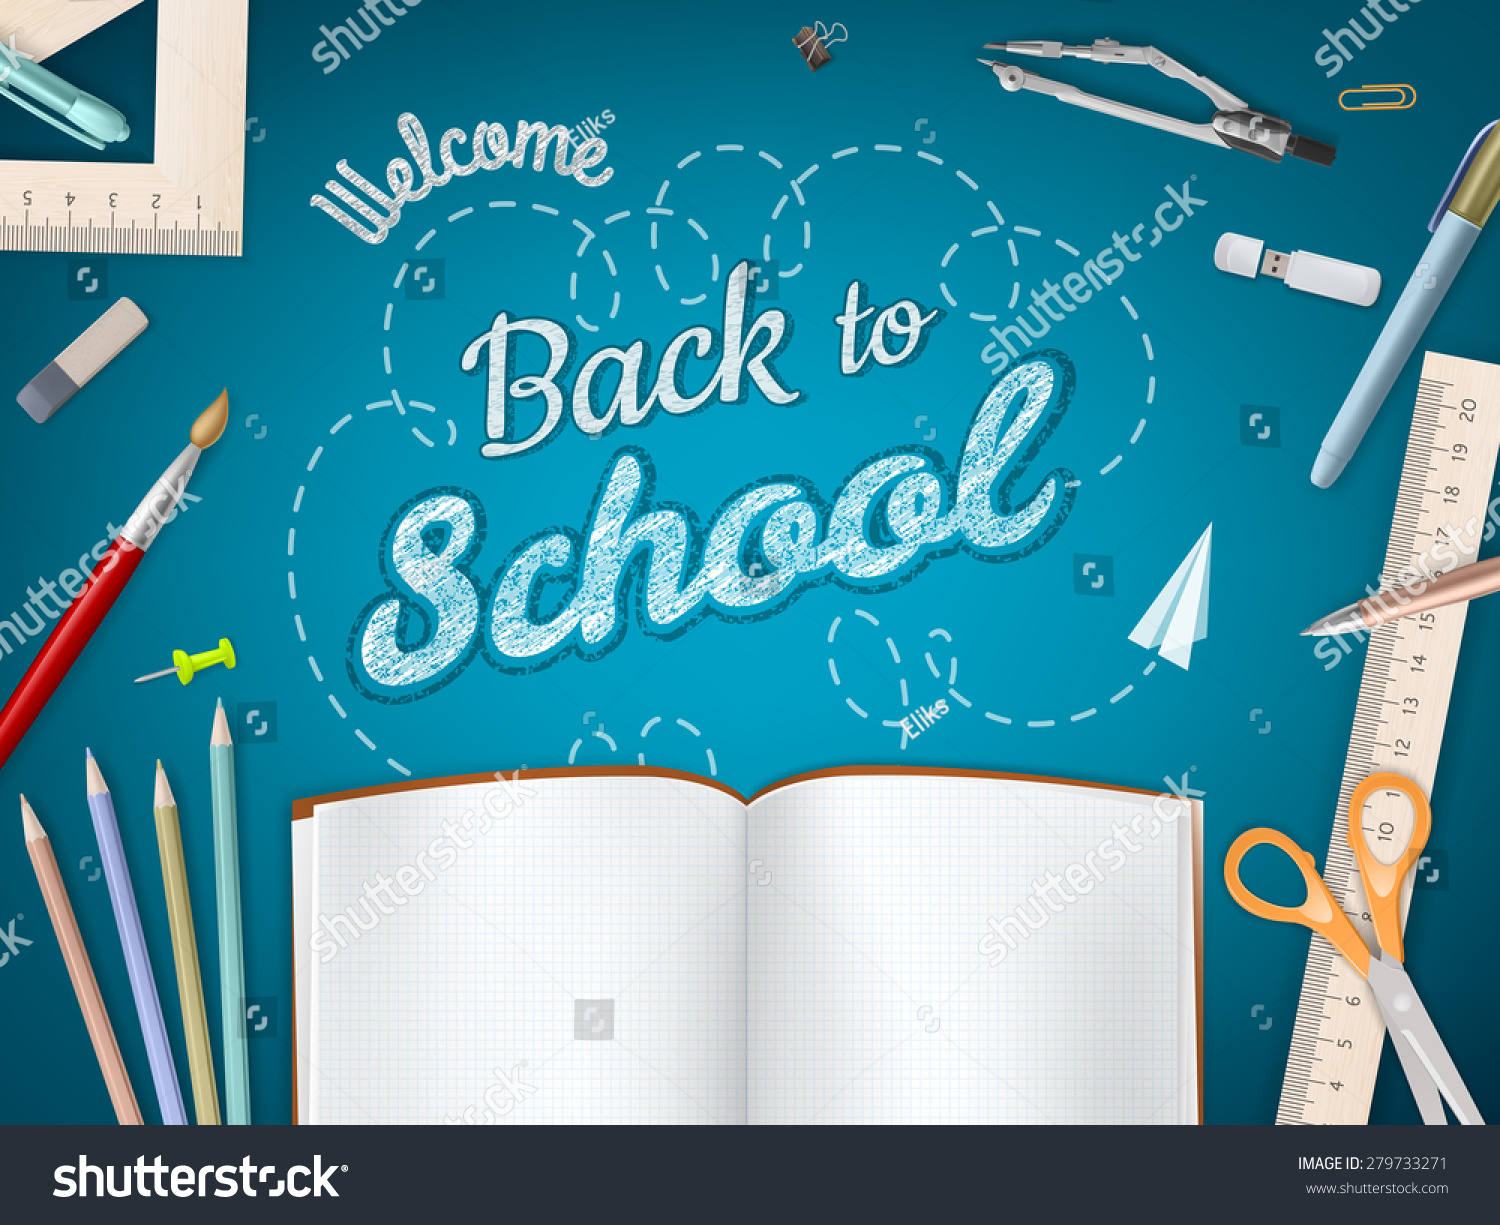 stock vector back to school background eps vector file included 279733271